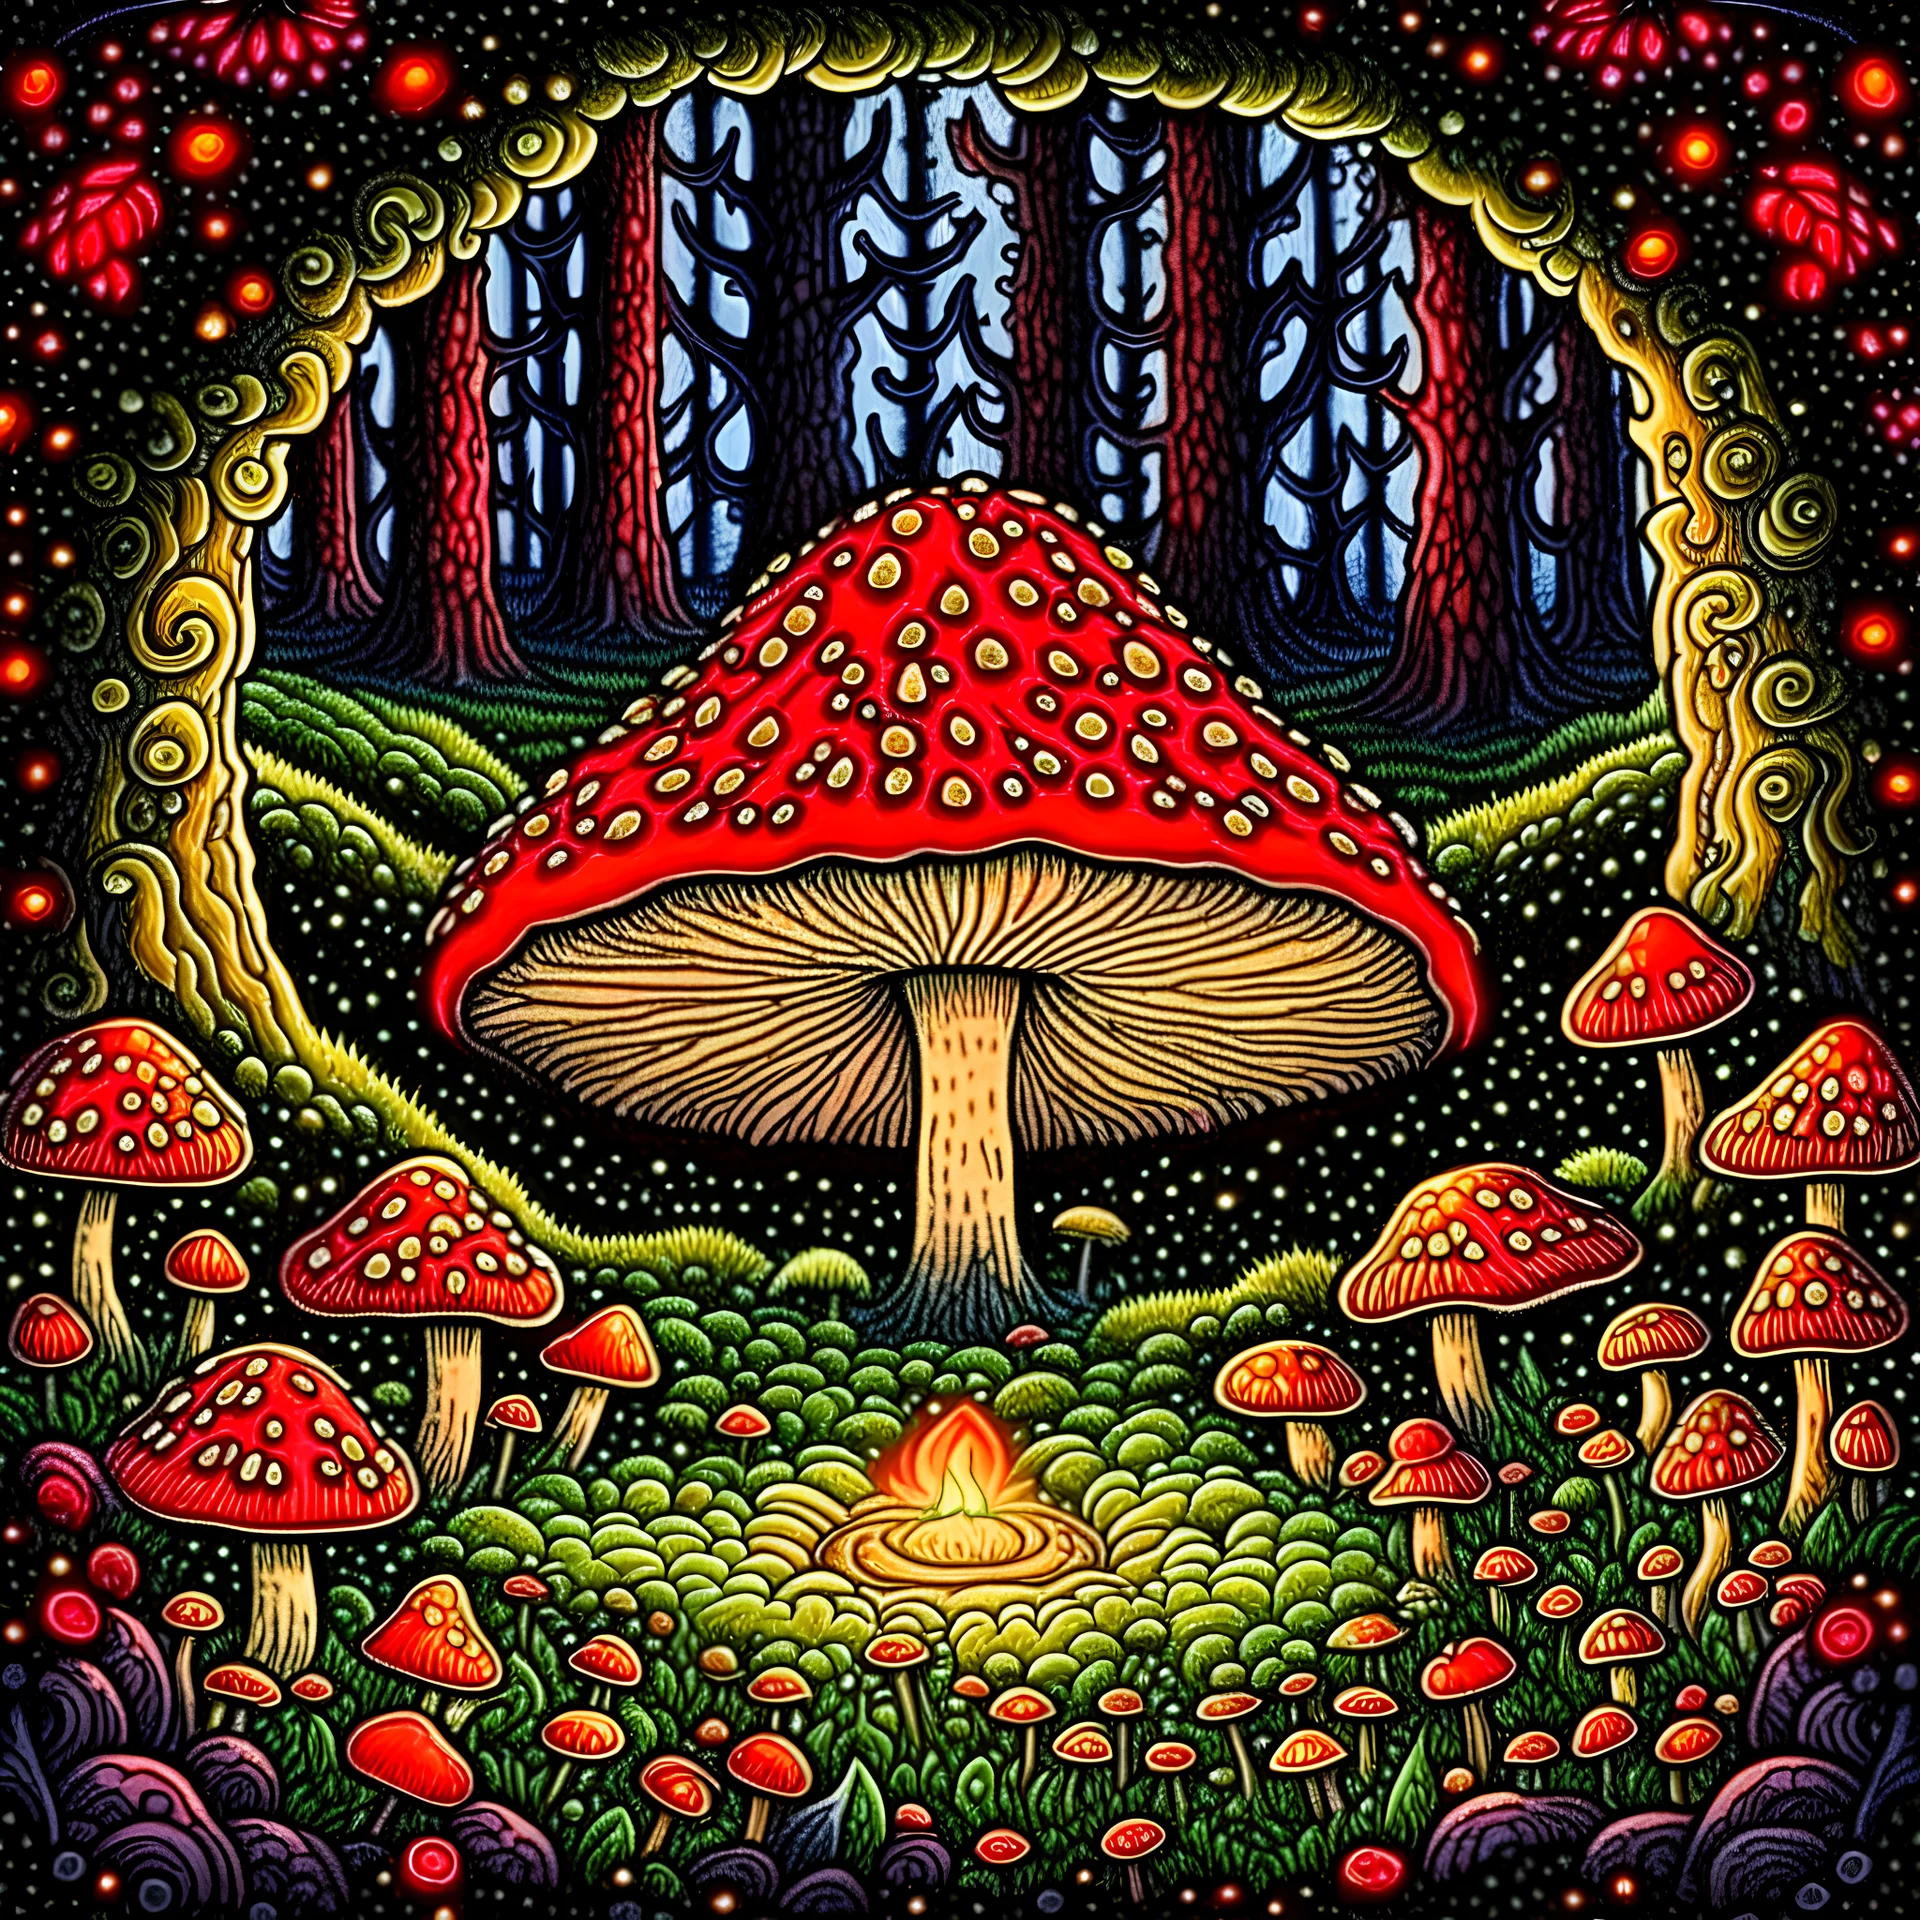 A gnome sleeping next to a campfire under a large mushroom. in the middle of a magical mushroom forest. art nouveau. hundreds of mushrooms everywhere. detailed symmetrical art deco border. fireflies everywhere with a cosmic background